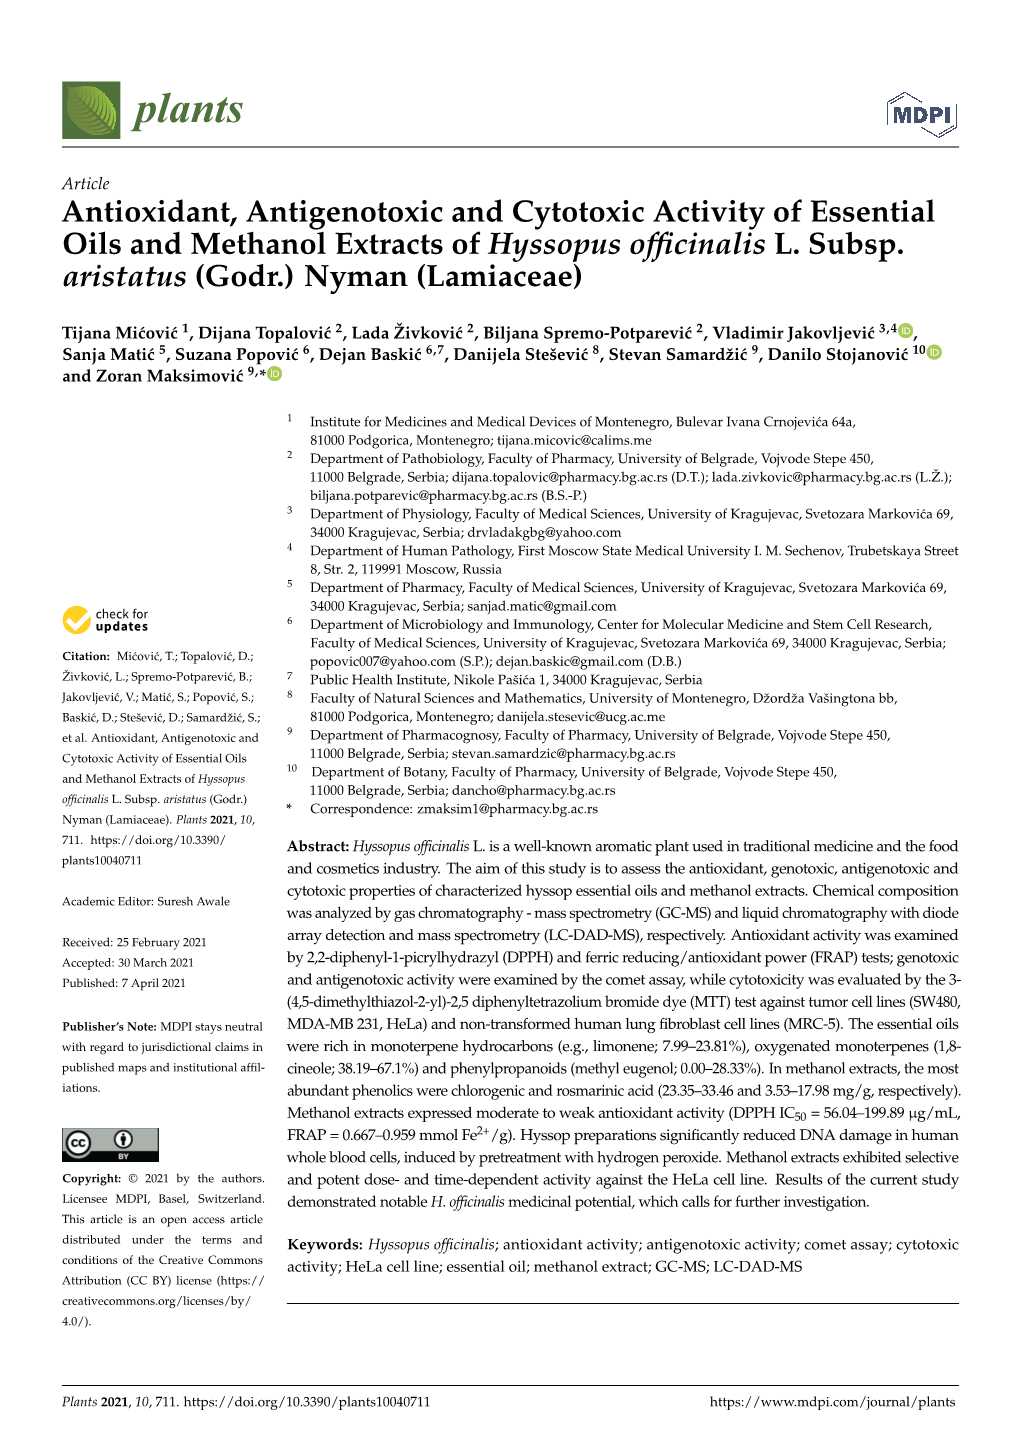 Antioxidant, Antigenotoxic and Cytotoxic Activity of Essential Oils and Methanol Extracts of Hyssopus Ofﬁcinalis L